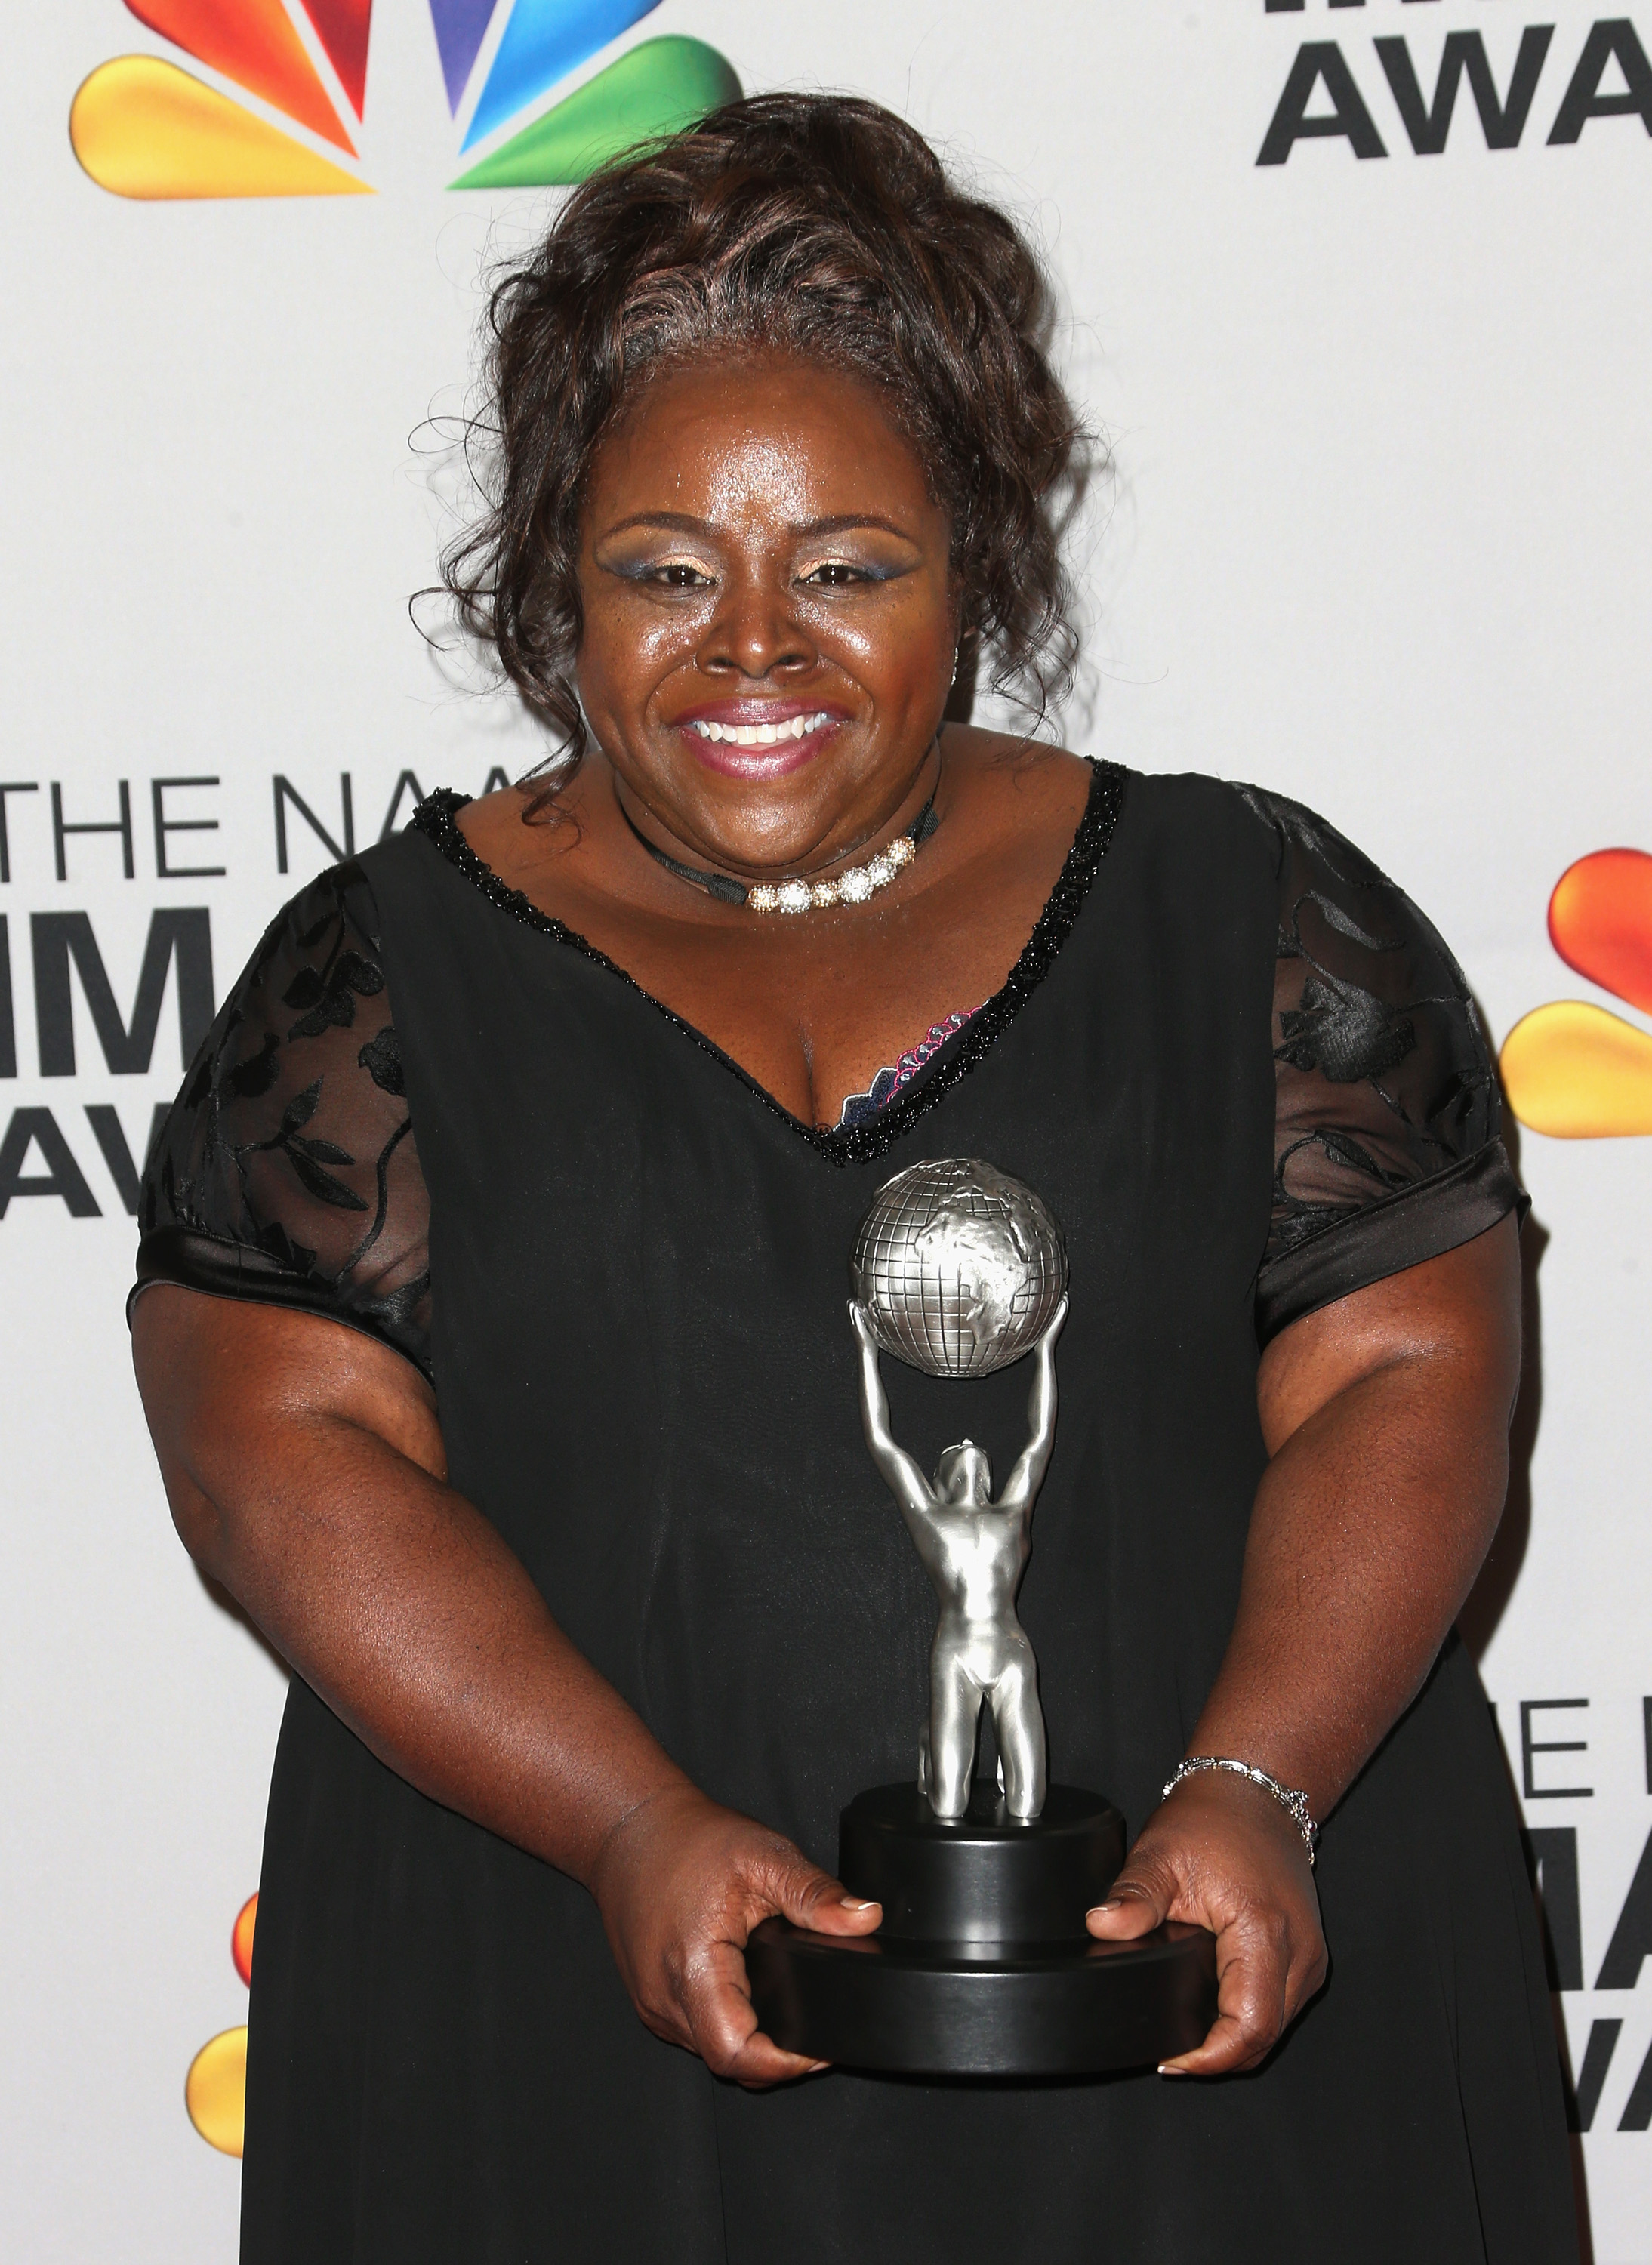 Cassi Davis poses with her award in the press room during the 44th NAACP Image Awards at The Shrine Auditorium on February 1, 2013, in Los Angeles, California. | Source: Getty Images